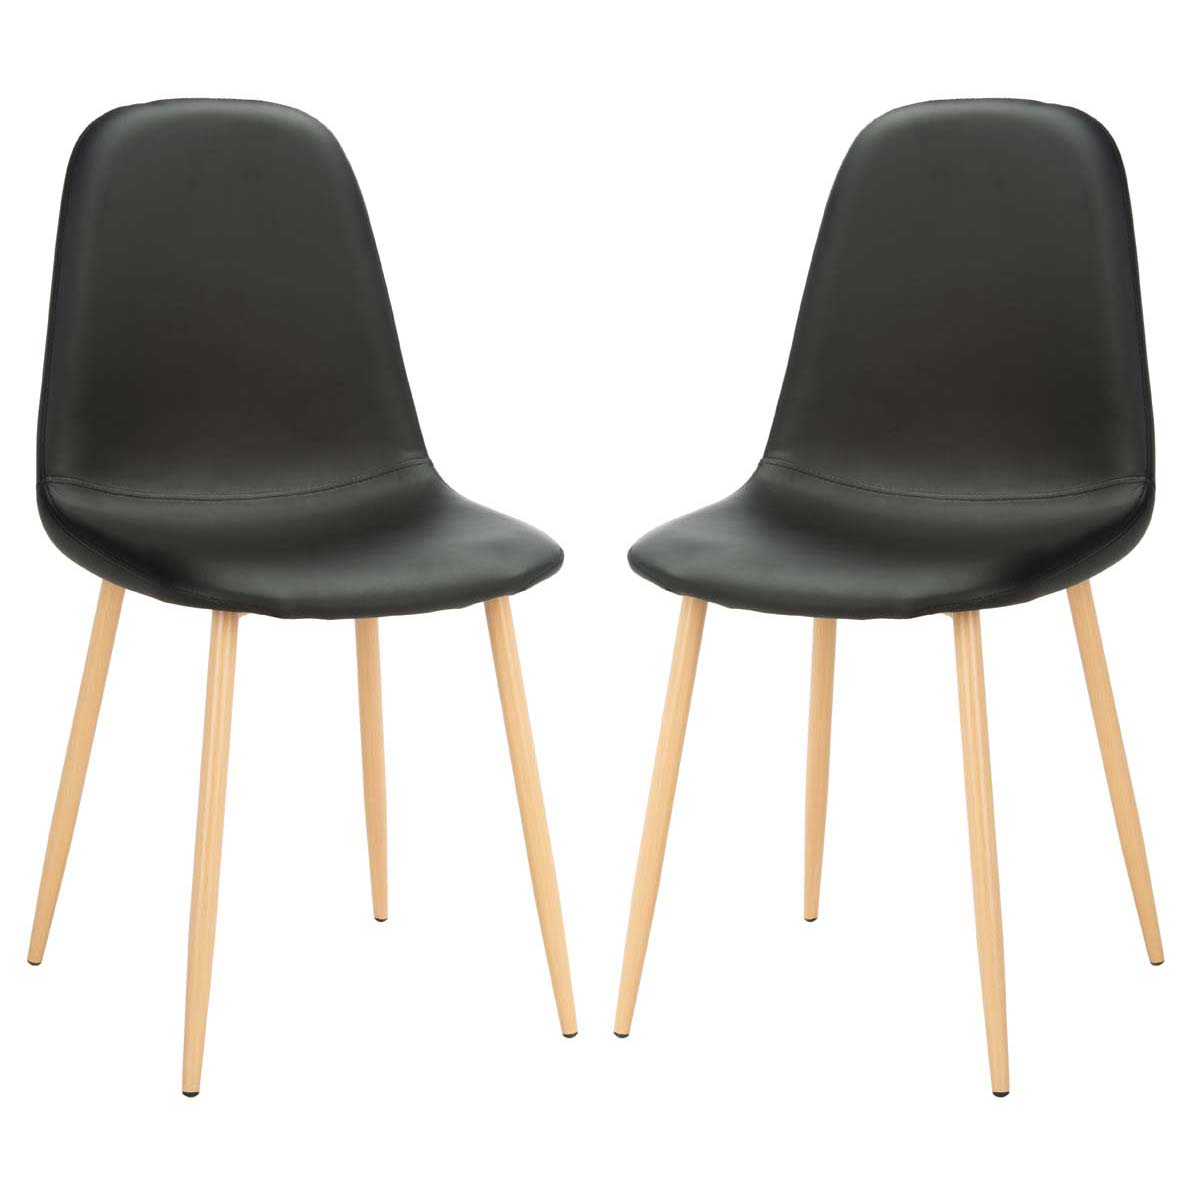 Safavieh Blaire Dining Chair , DCH2001 - Black / Natural (Set of 2)